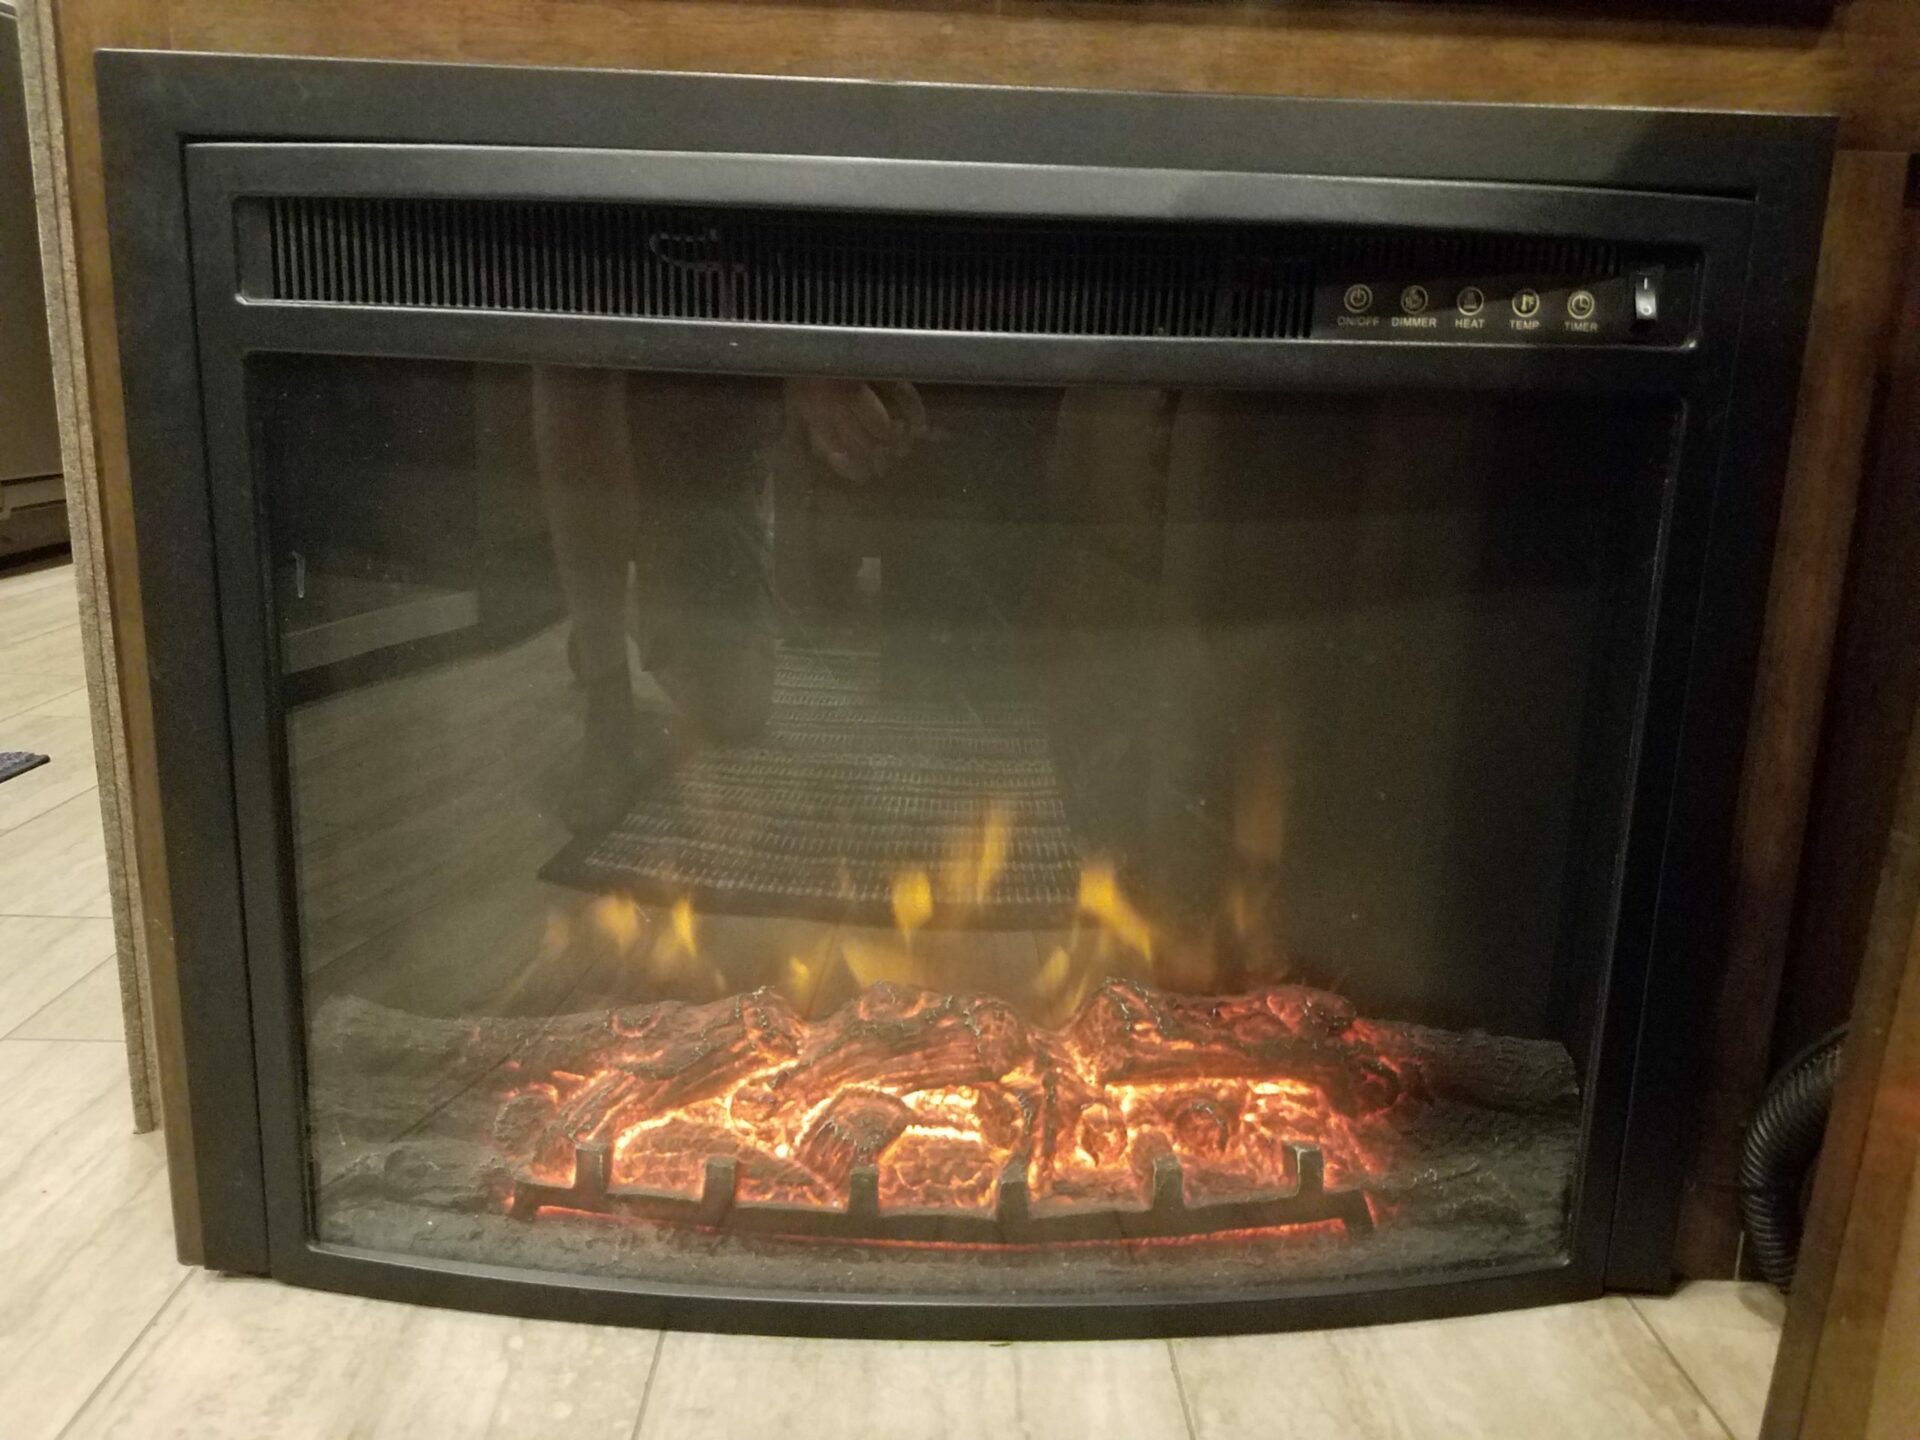 Electric Fireplace Squeak How To Get, How To Repair Flame On Electric Fireplace